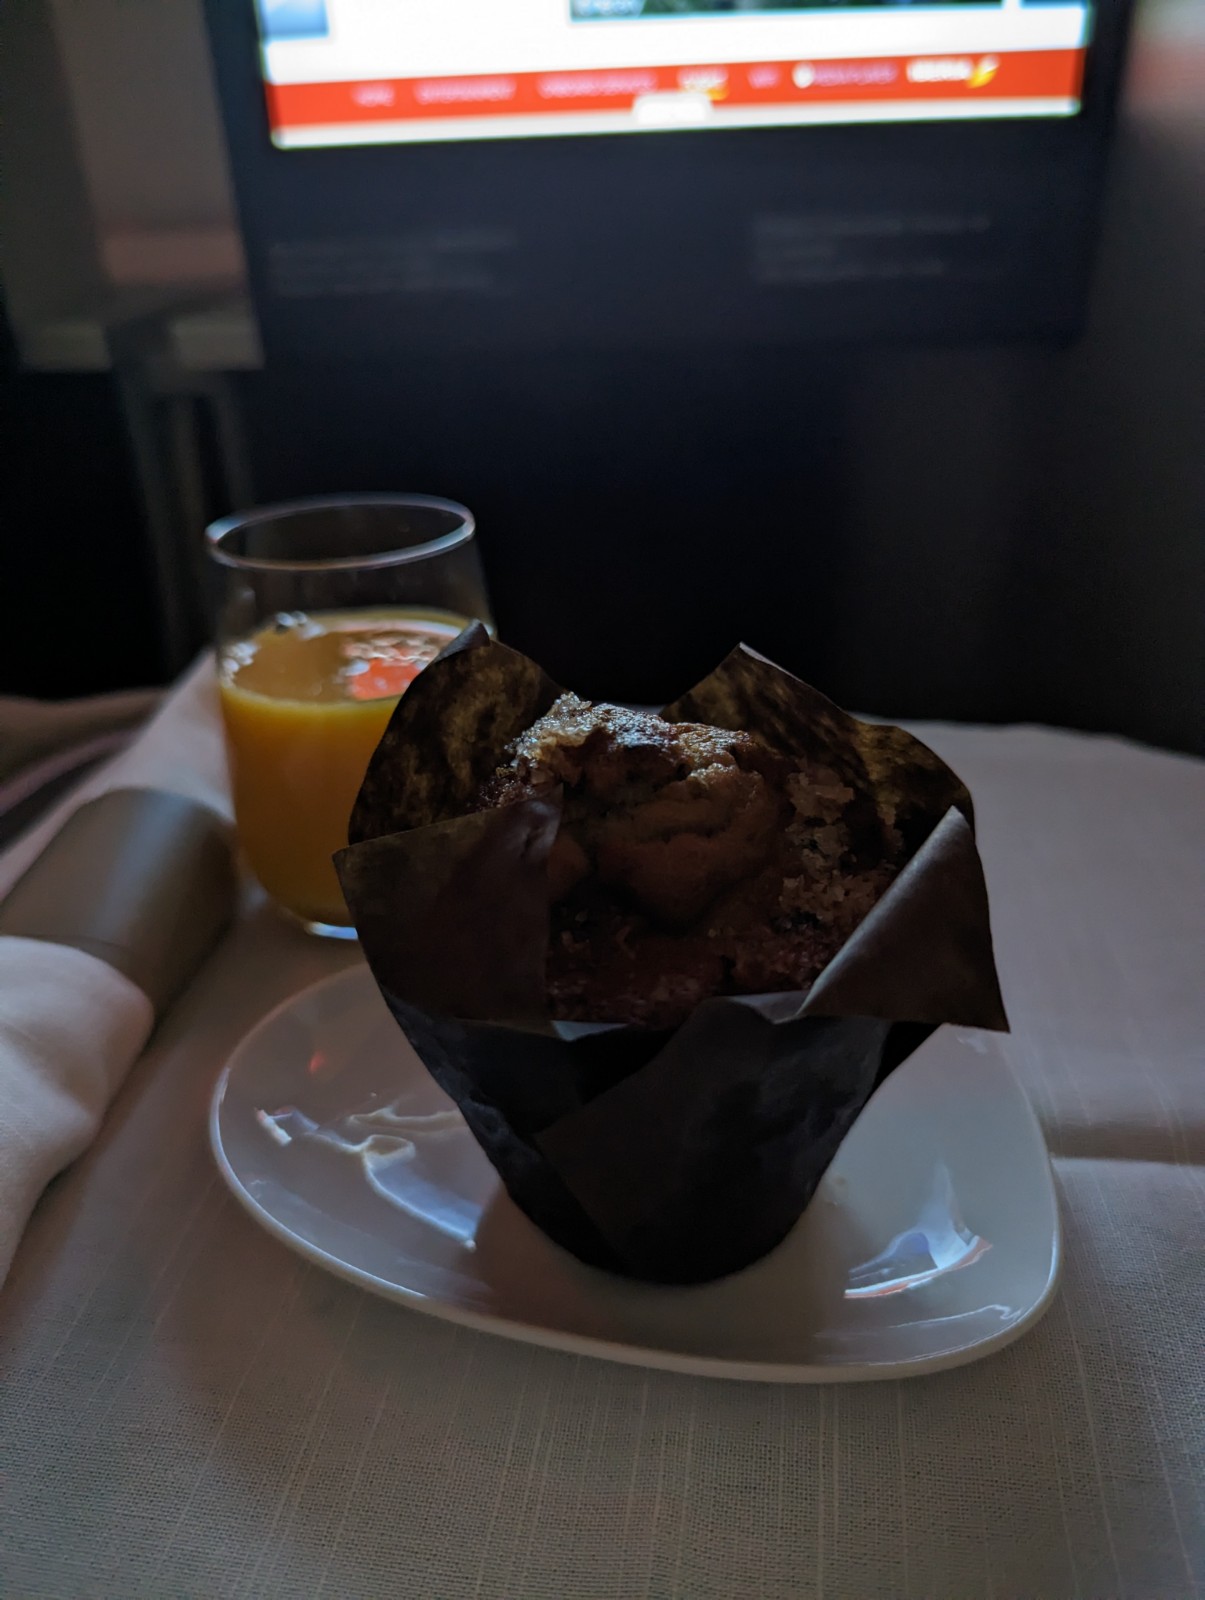 a muffin on a plate next to a glass of orange juice